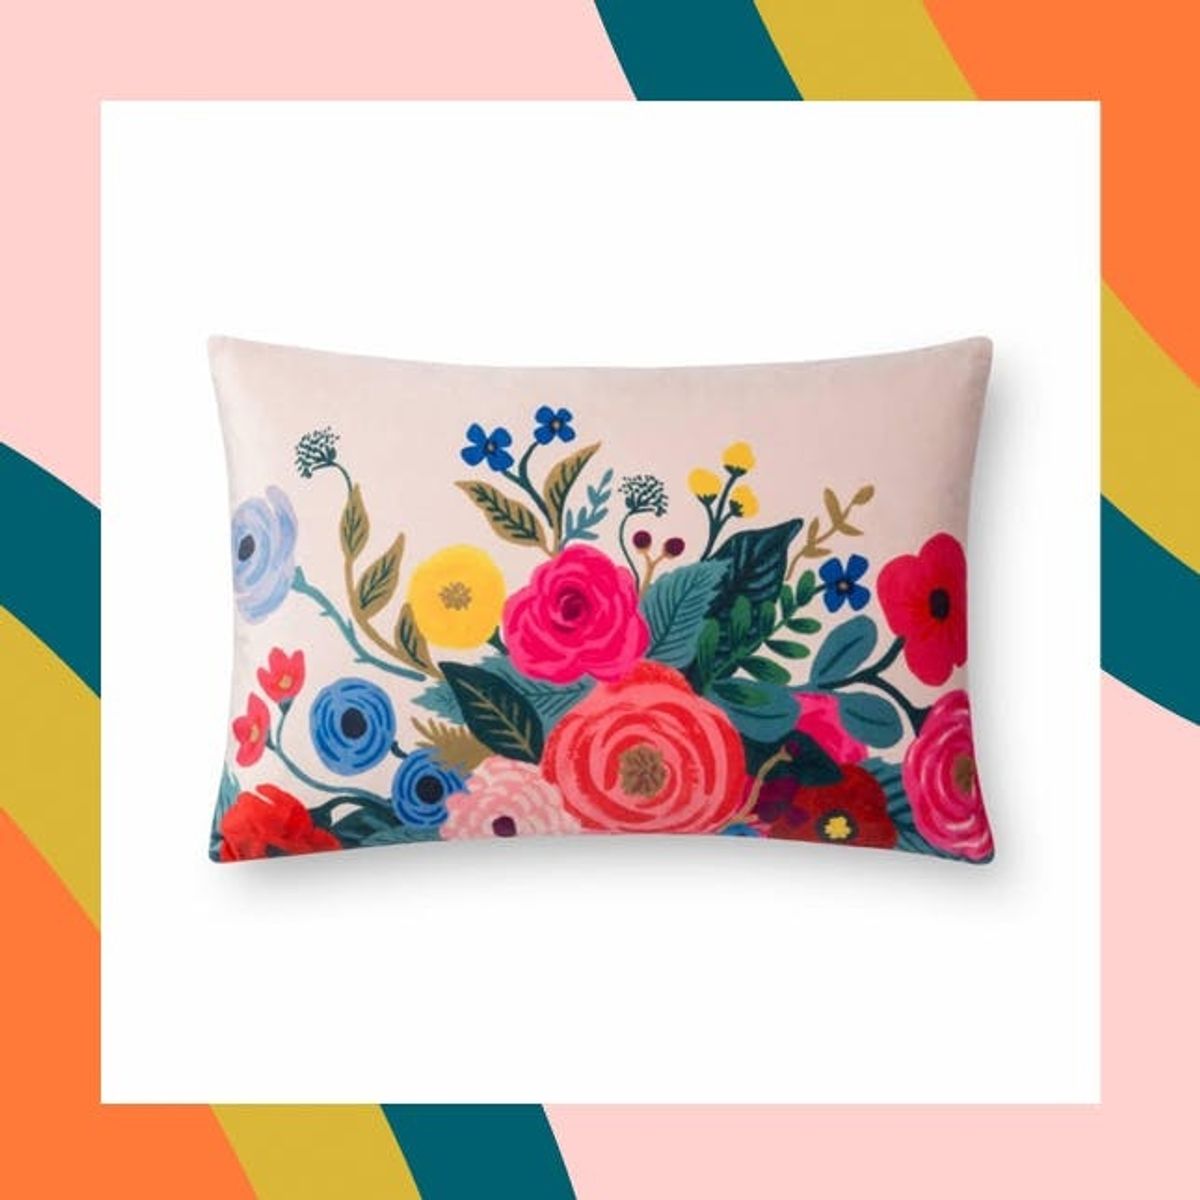 Rifle Paper Co. Just Launched a Floral-Filled Home Decor Collection That’s Totally Granny-Chic